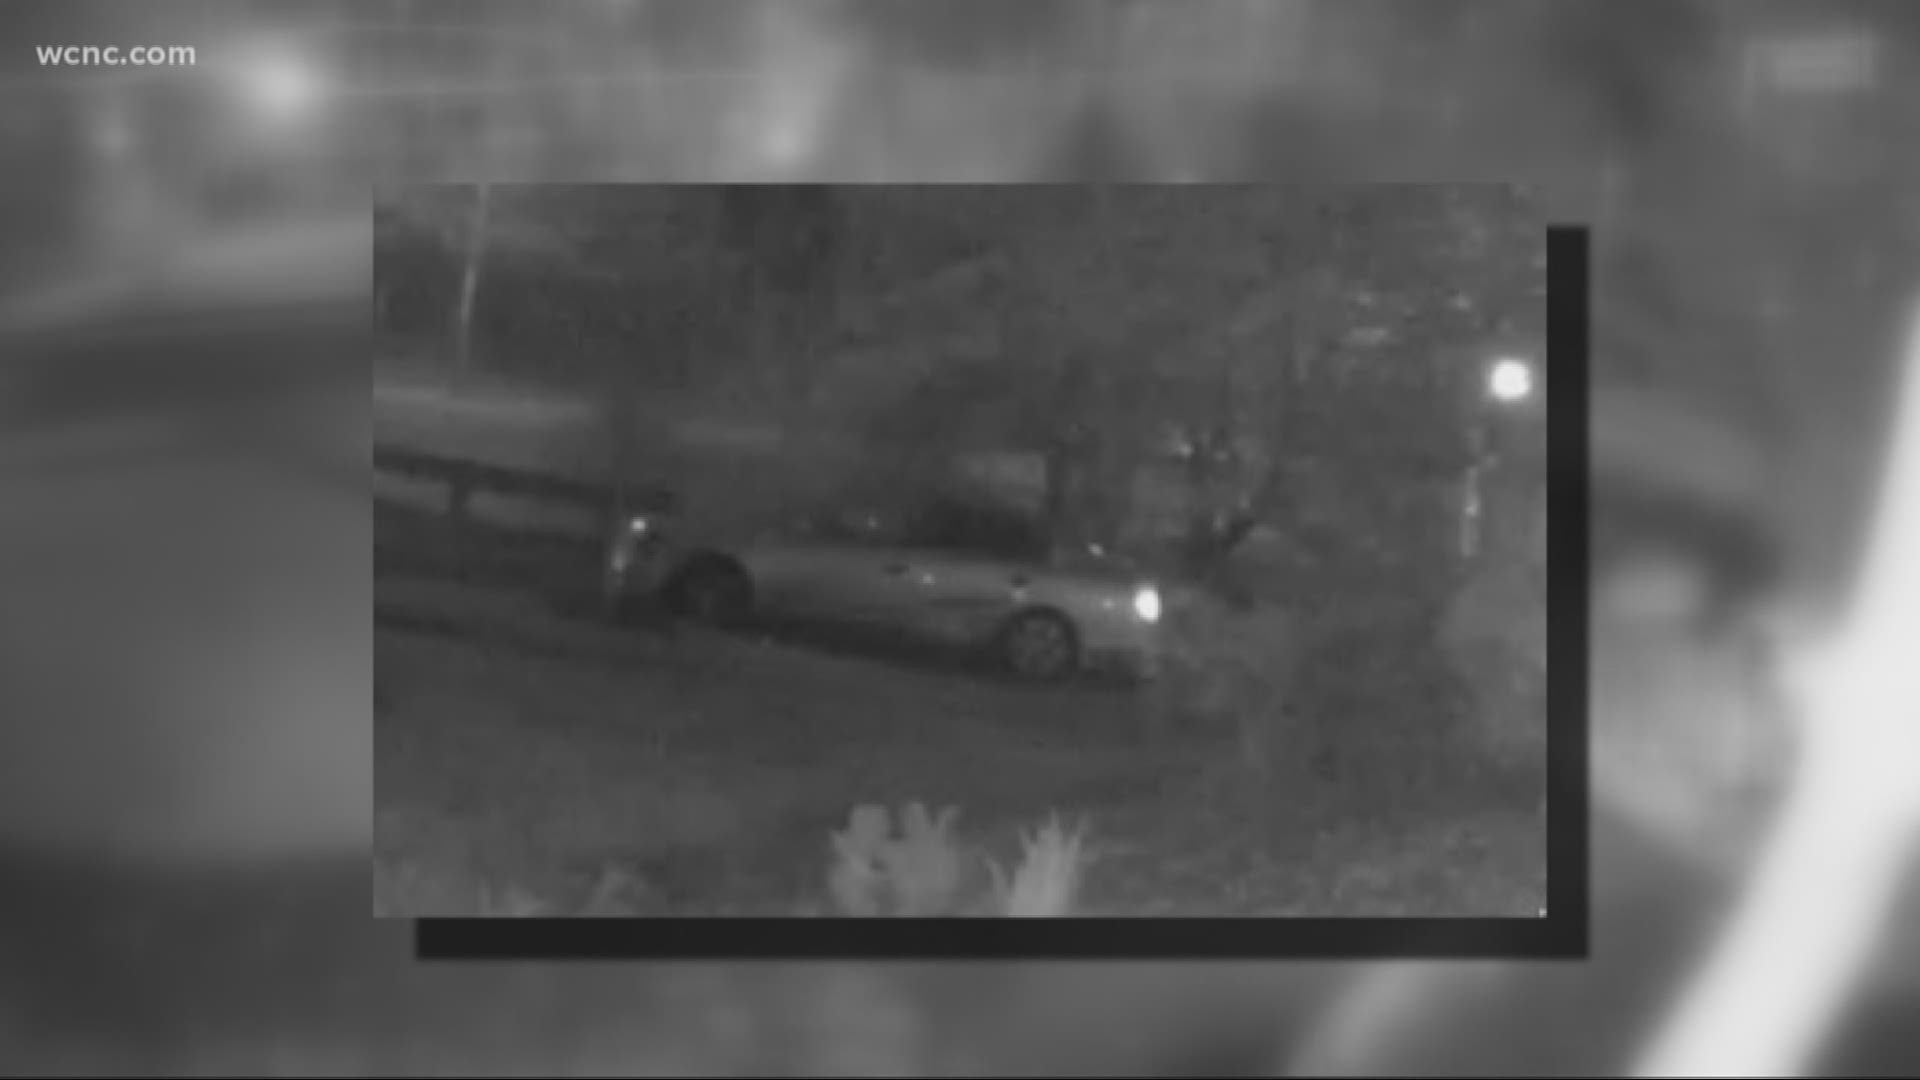 The homeowner shared video with NBC Charlotte in which you can see someone in a car pull up and start shooting. The victim said bullets hit his car and home.